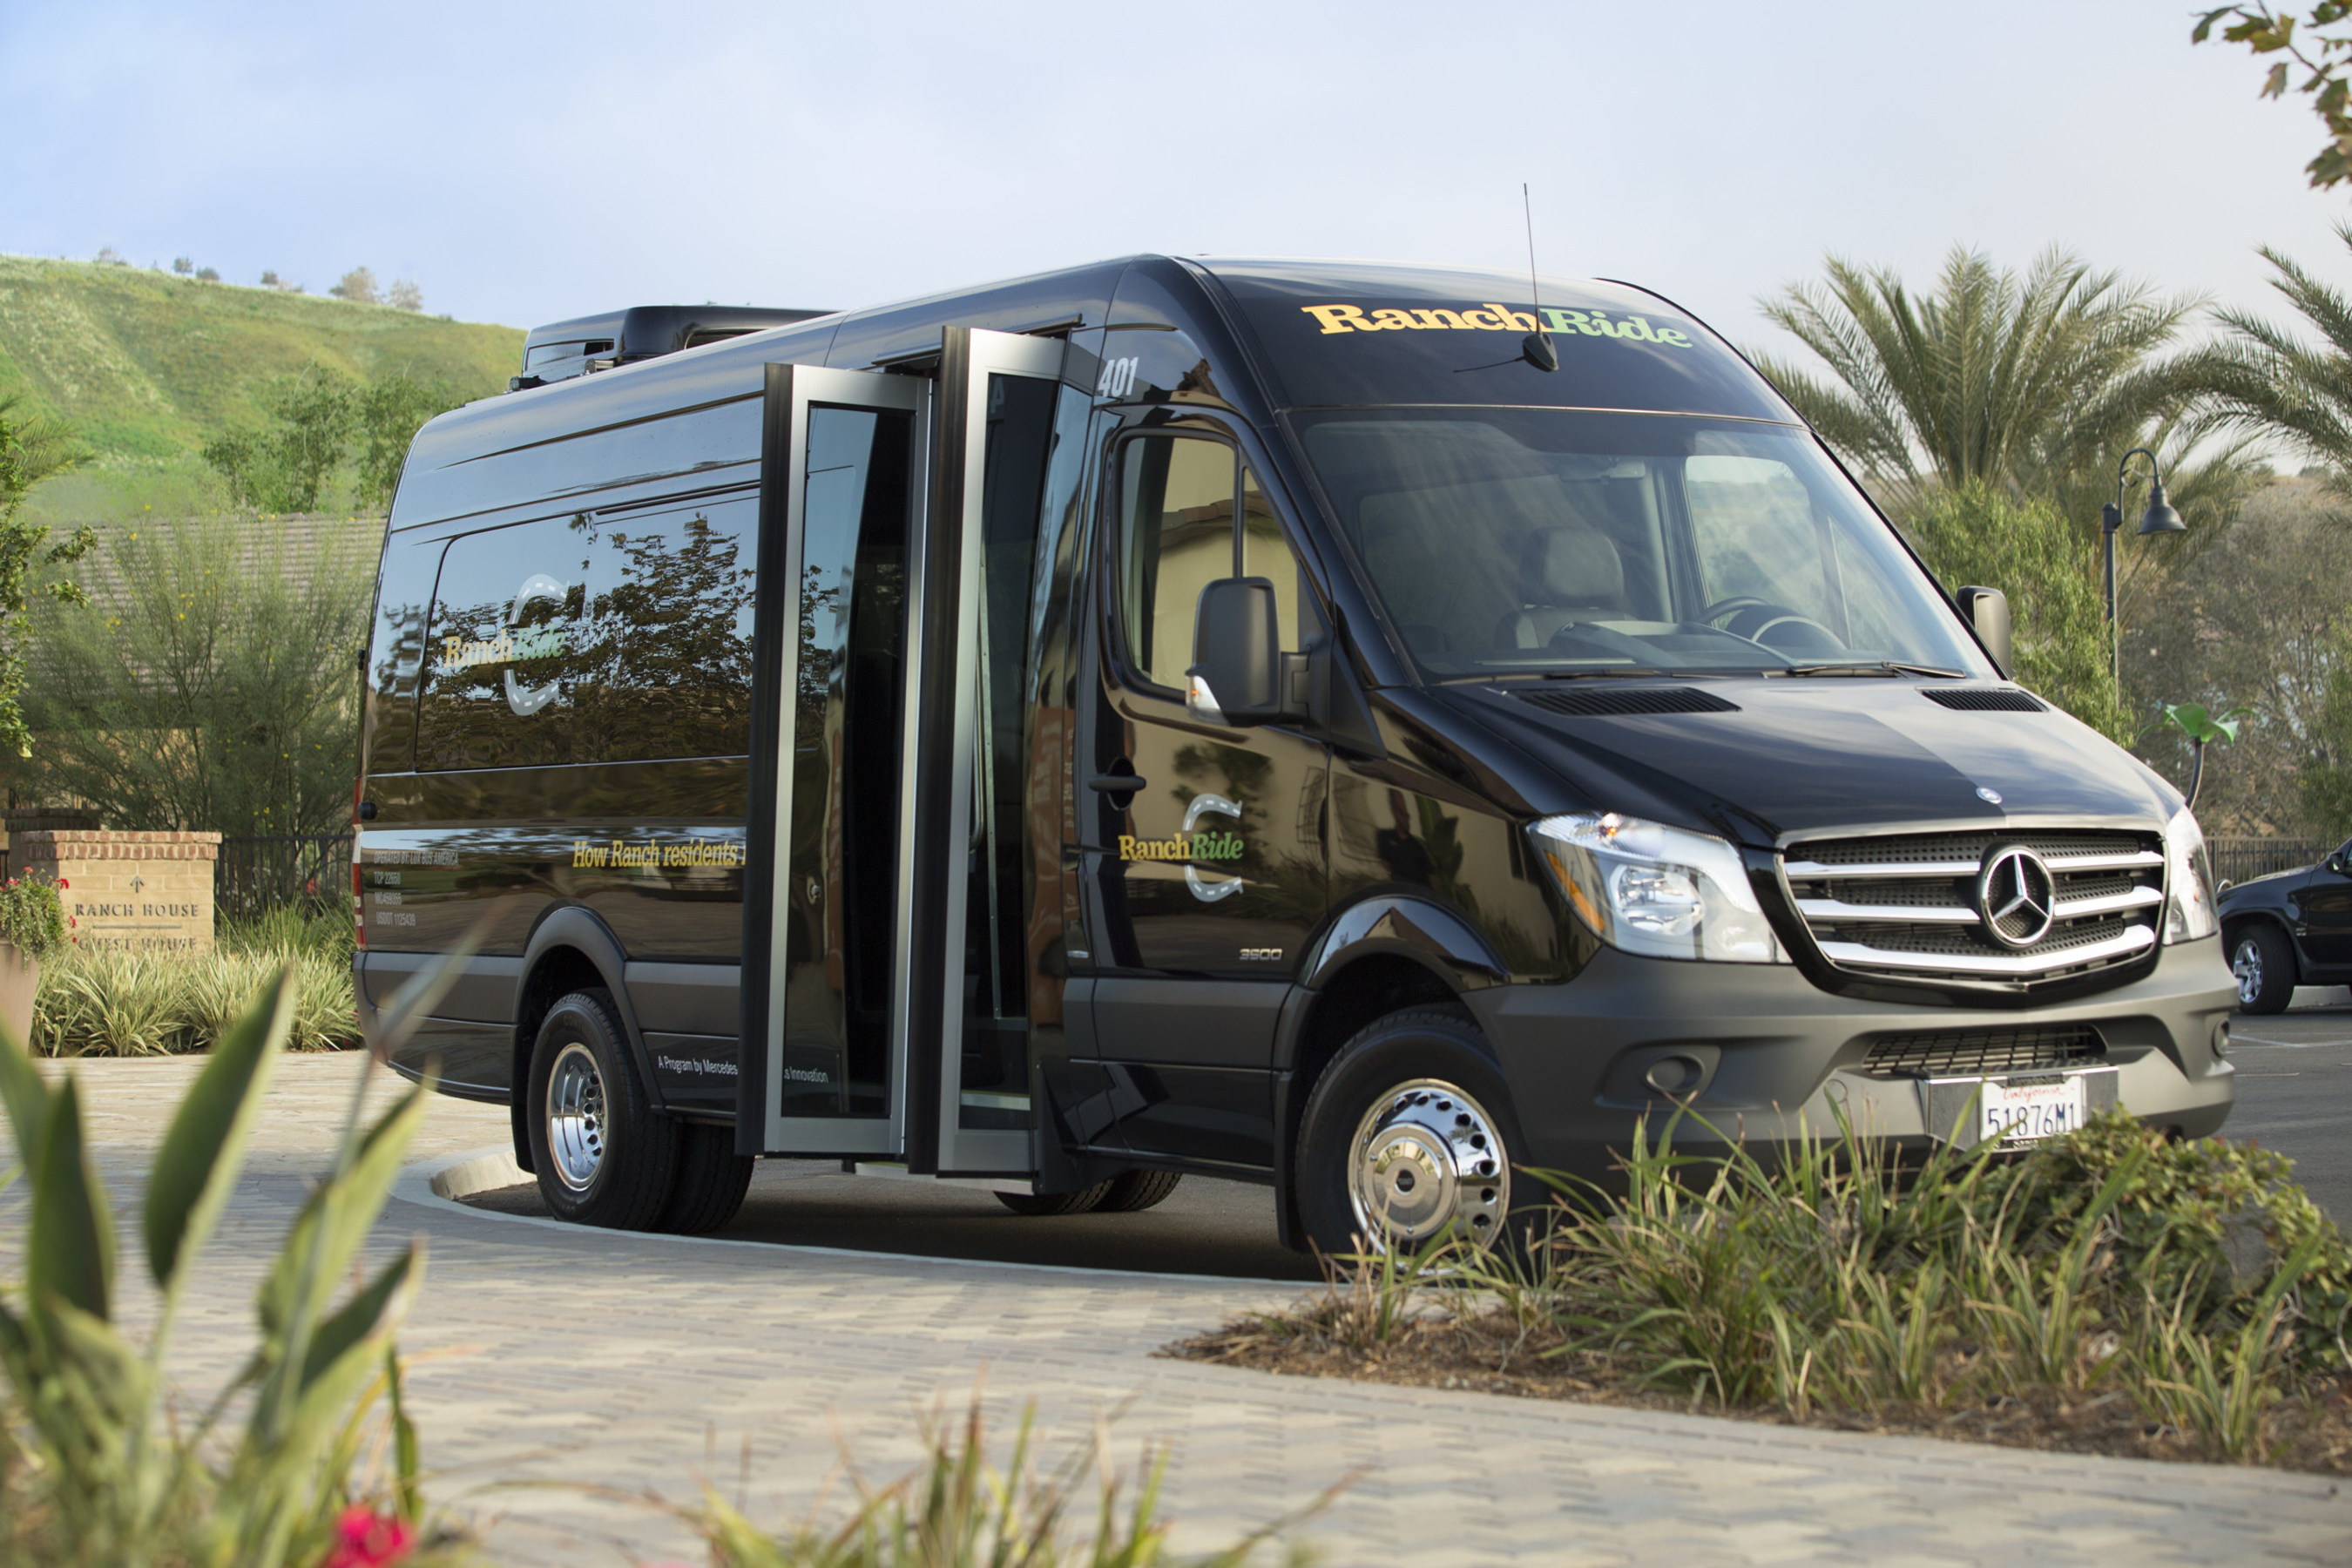 Luxury-style, 14-seat Mercedes-Benz Sprinter passenger shuttles are being used for the new RanchRide mobility services.